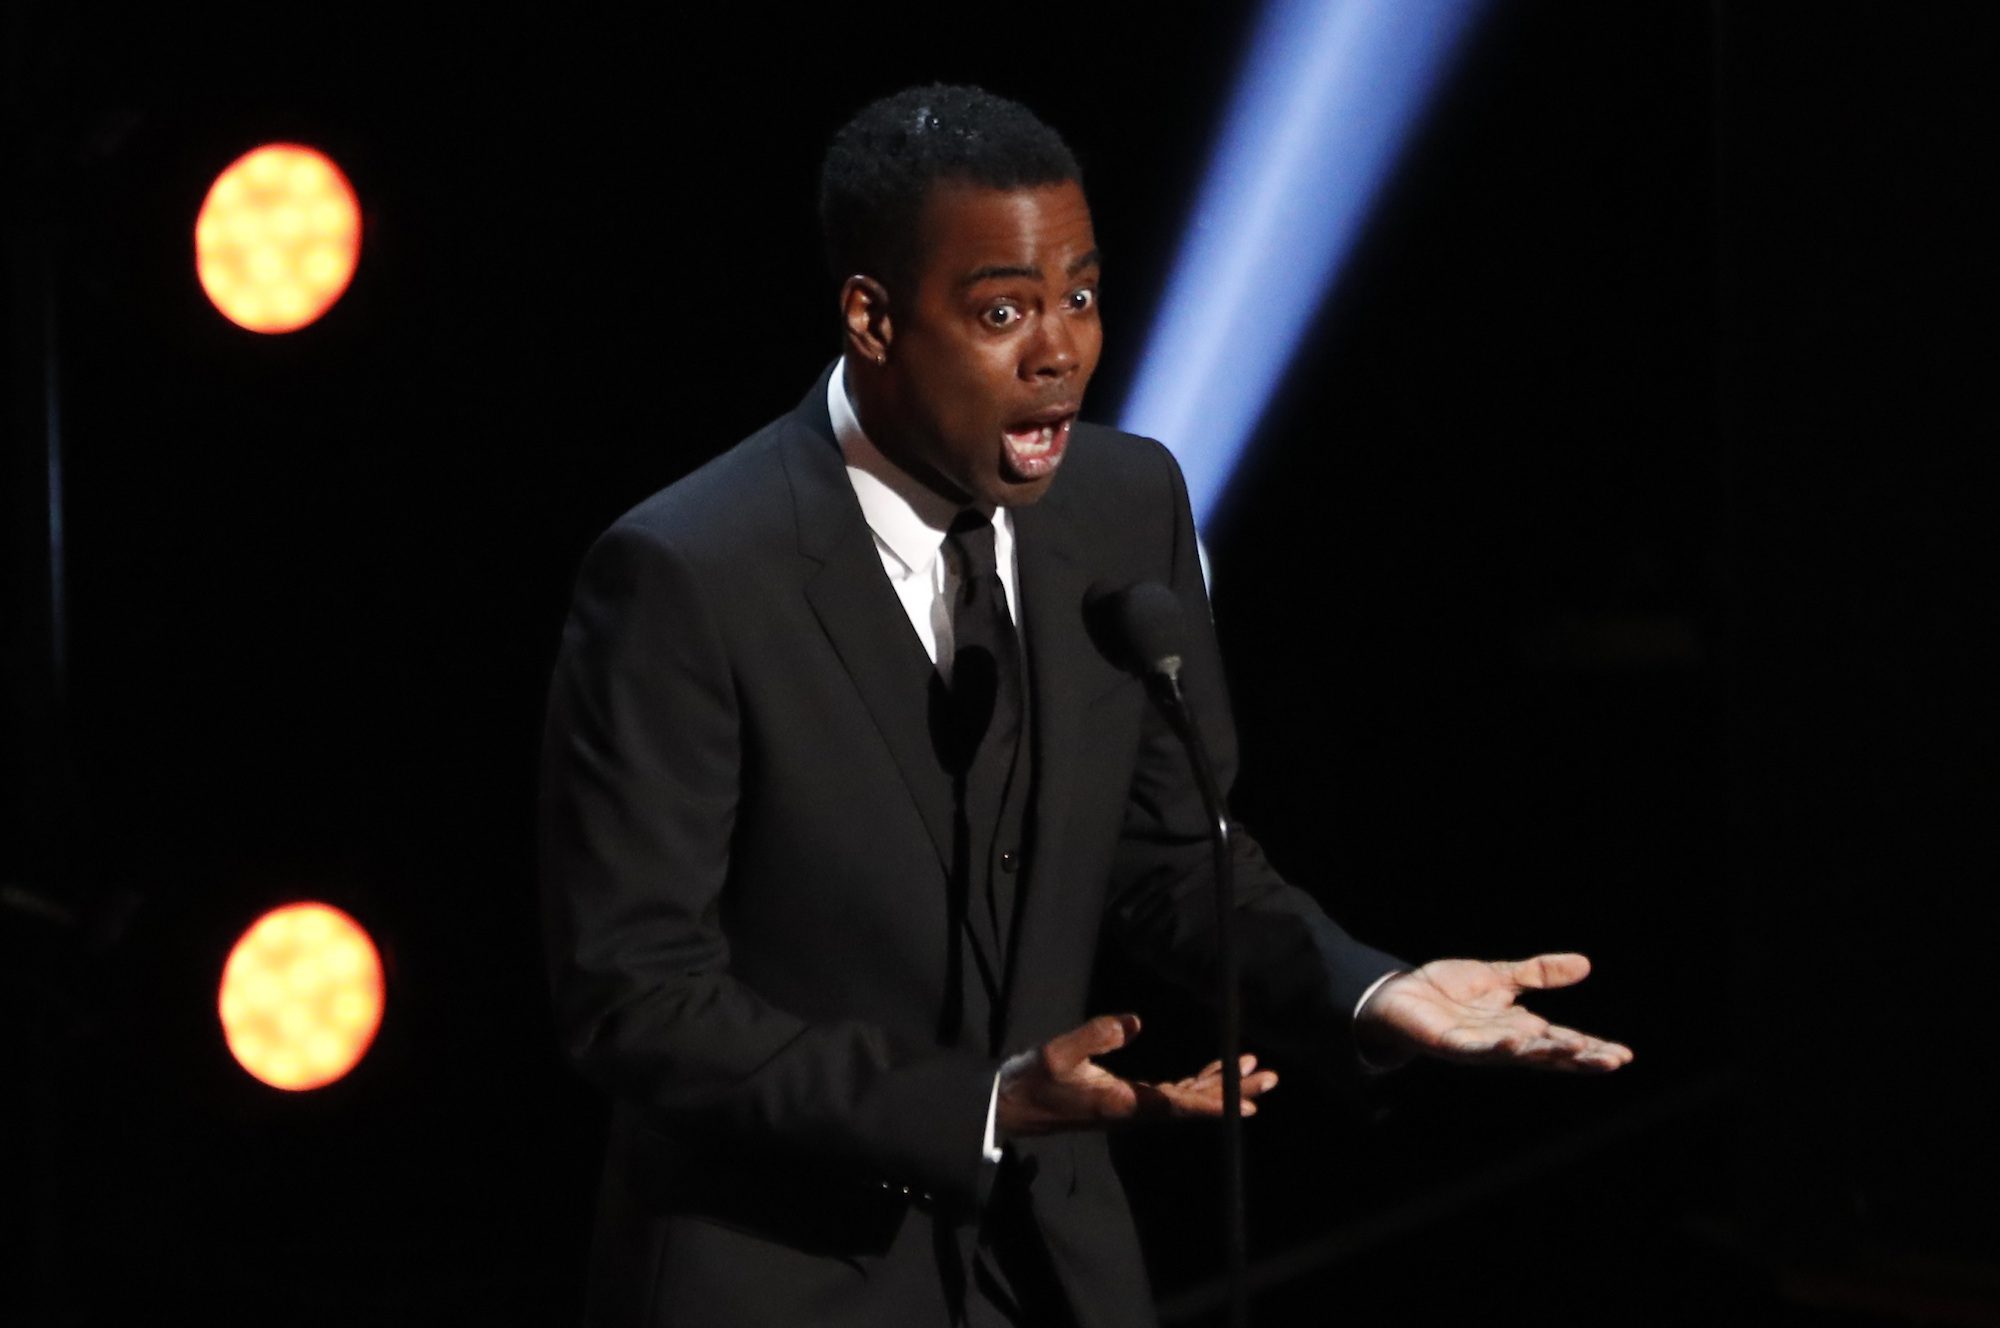 50th NAACP Image Awards - Show - Los Angeles, California, U.S., March 30, 2019 - Chris Rock speaks on stage. REUTERS/Mario Anzuoni/File Photo